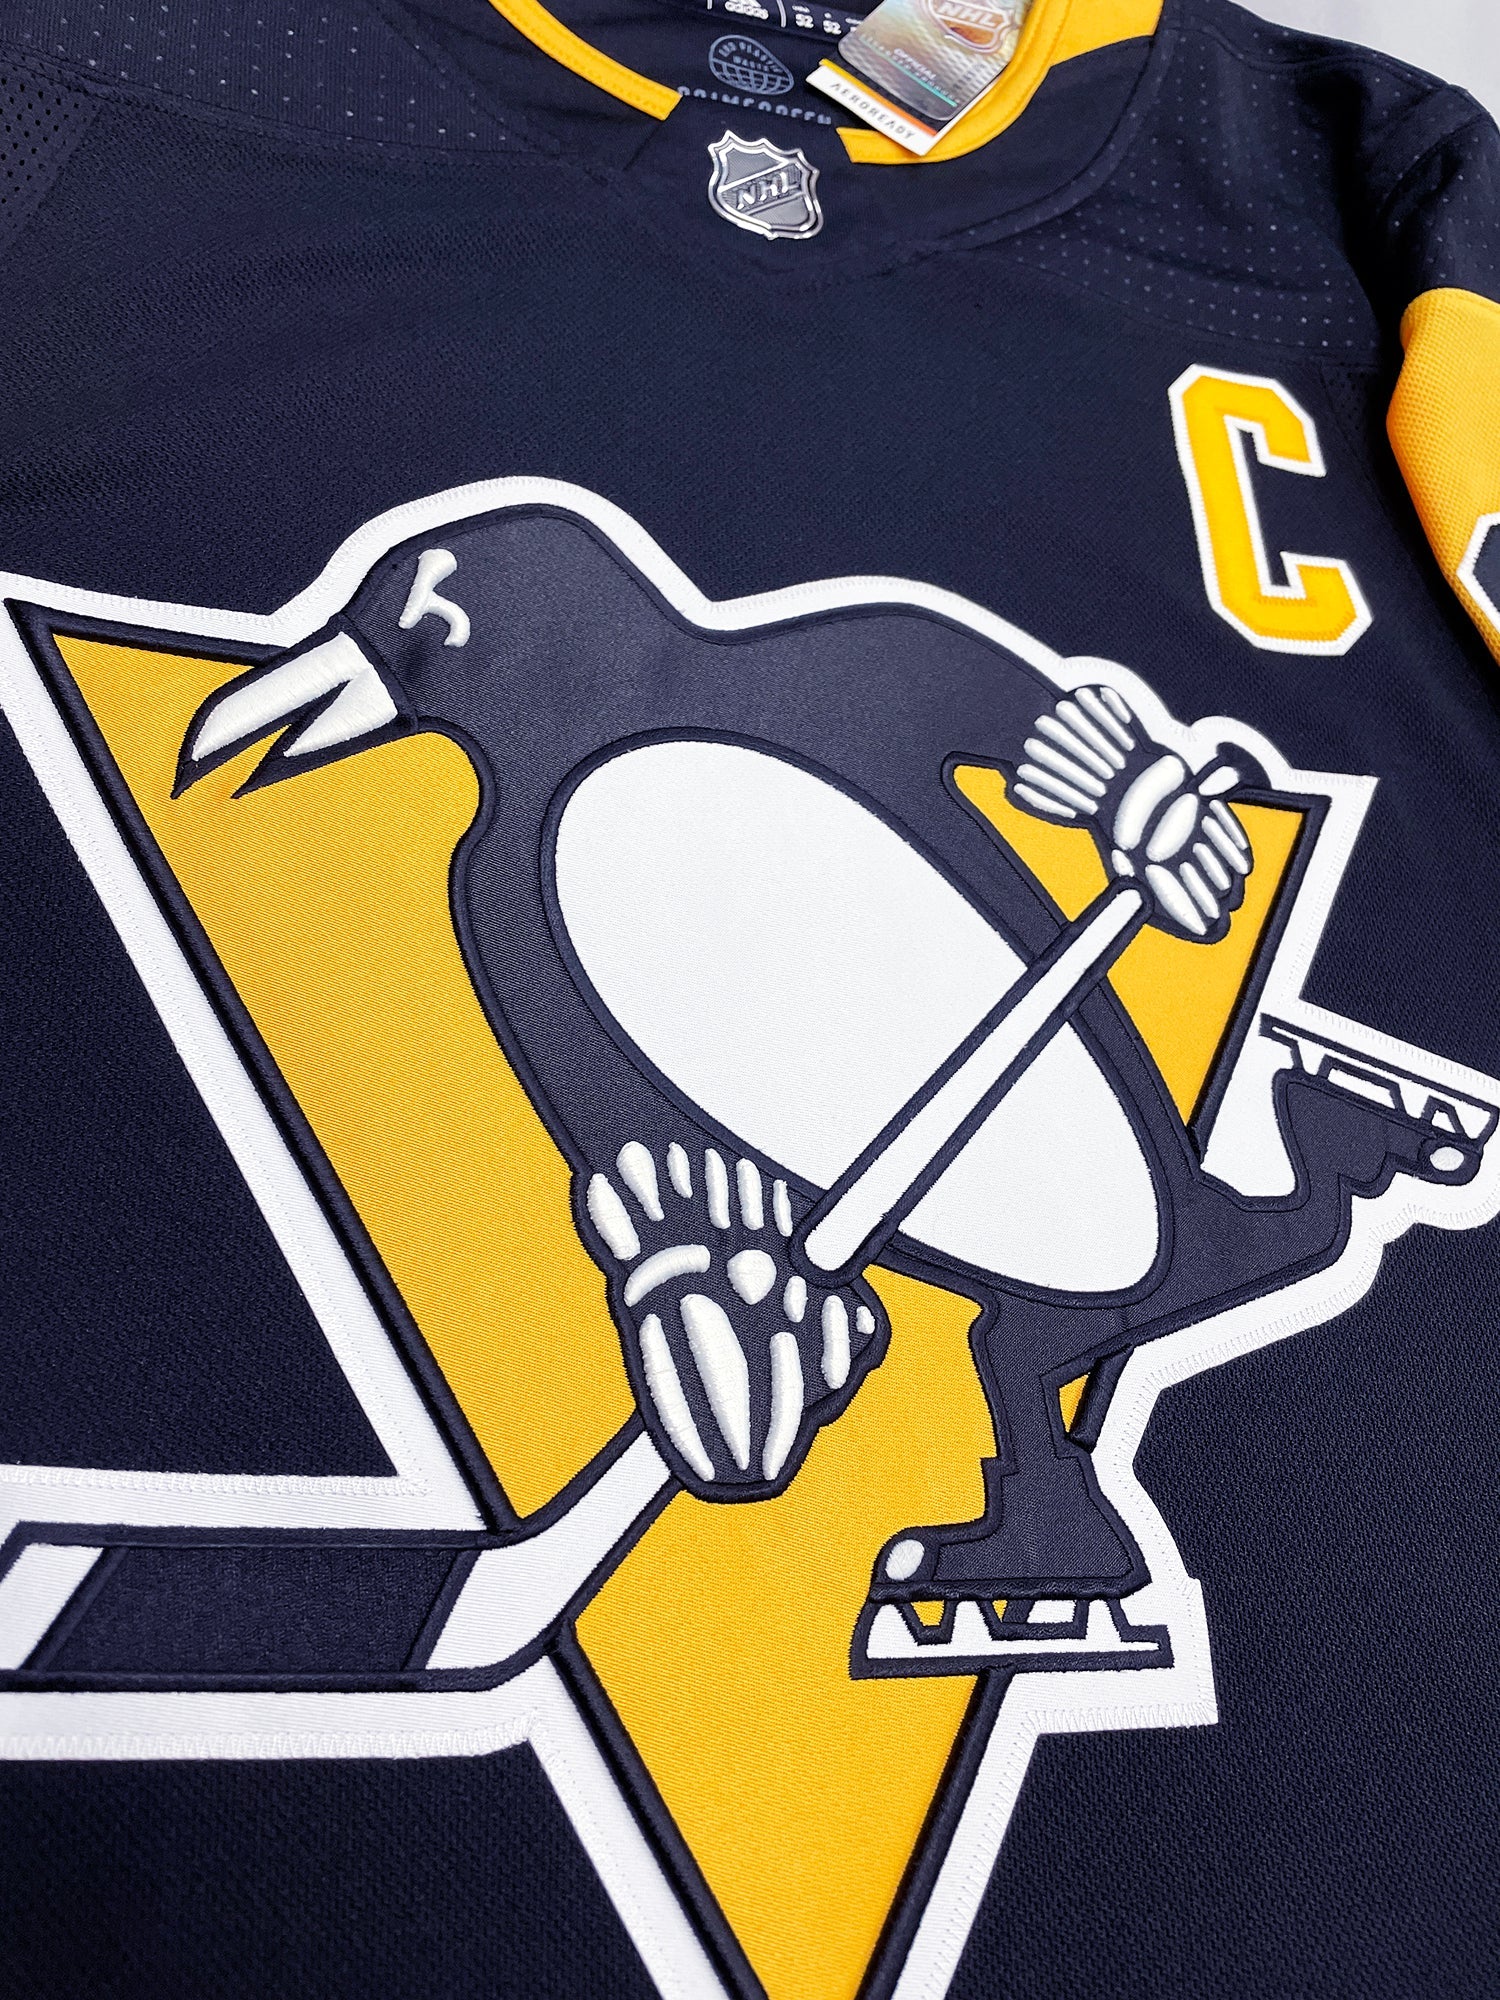 Sidney Crosby has specialized Pittsburgh Penguins jersey made to honour  Humboldt Broncos